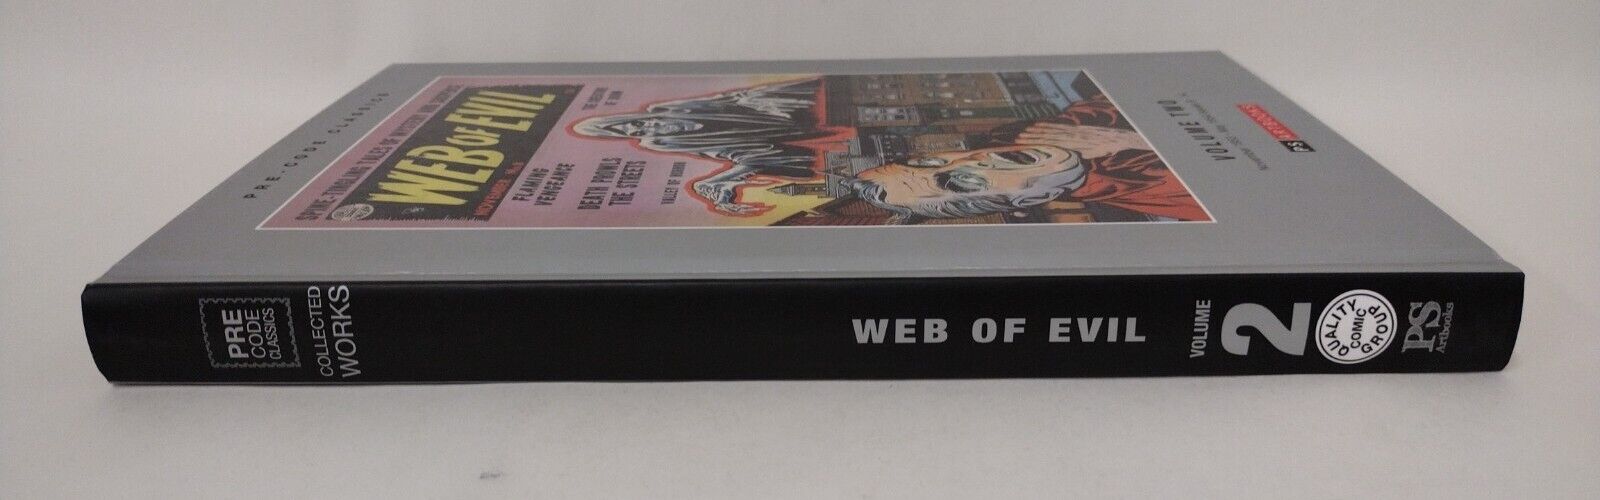  Web Of Evil Vol 2 Hardcover Issues 8-14 Pre Code Classic( Brand New)